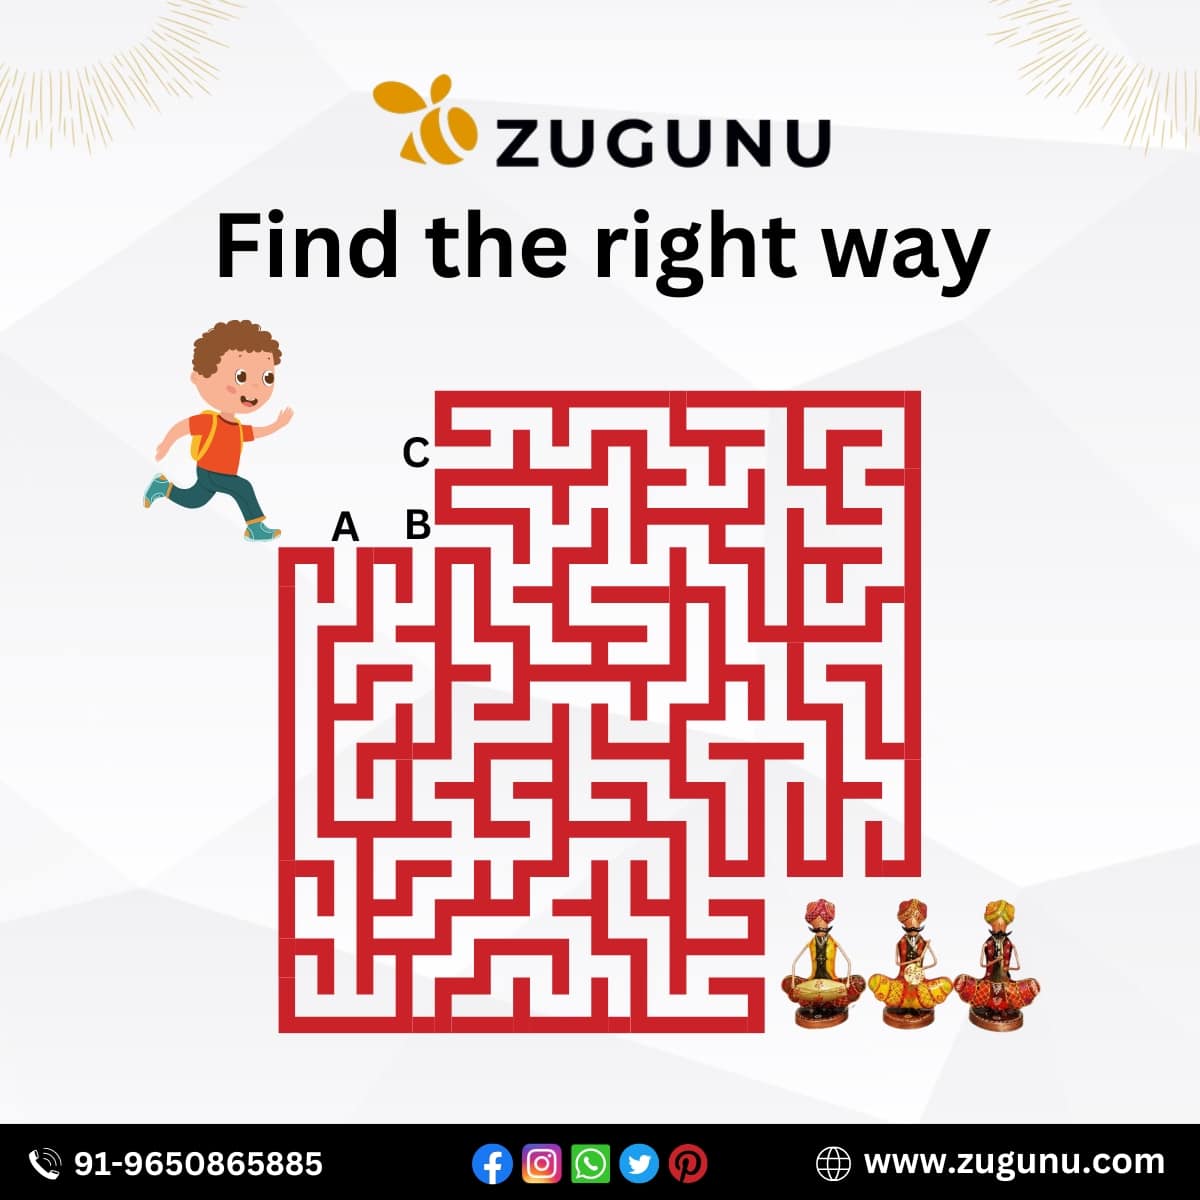 Play Along With ZuGuNu For Best Offers On Showpieces